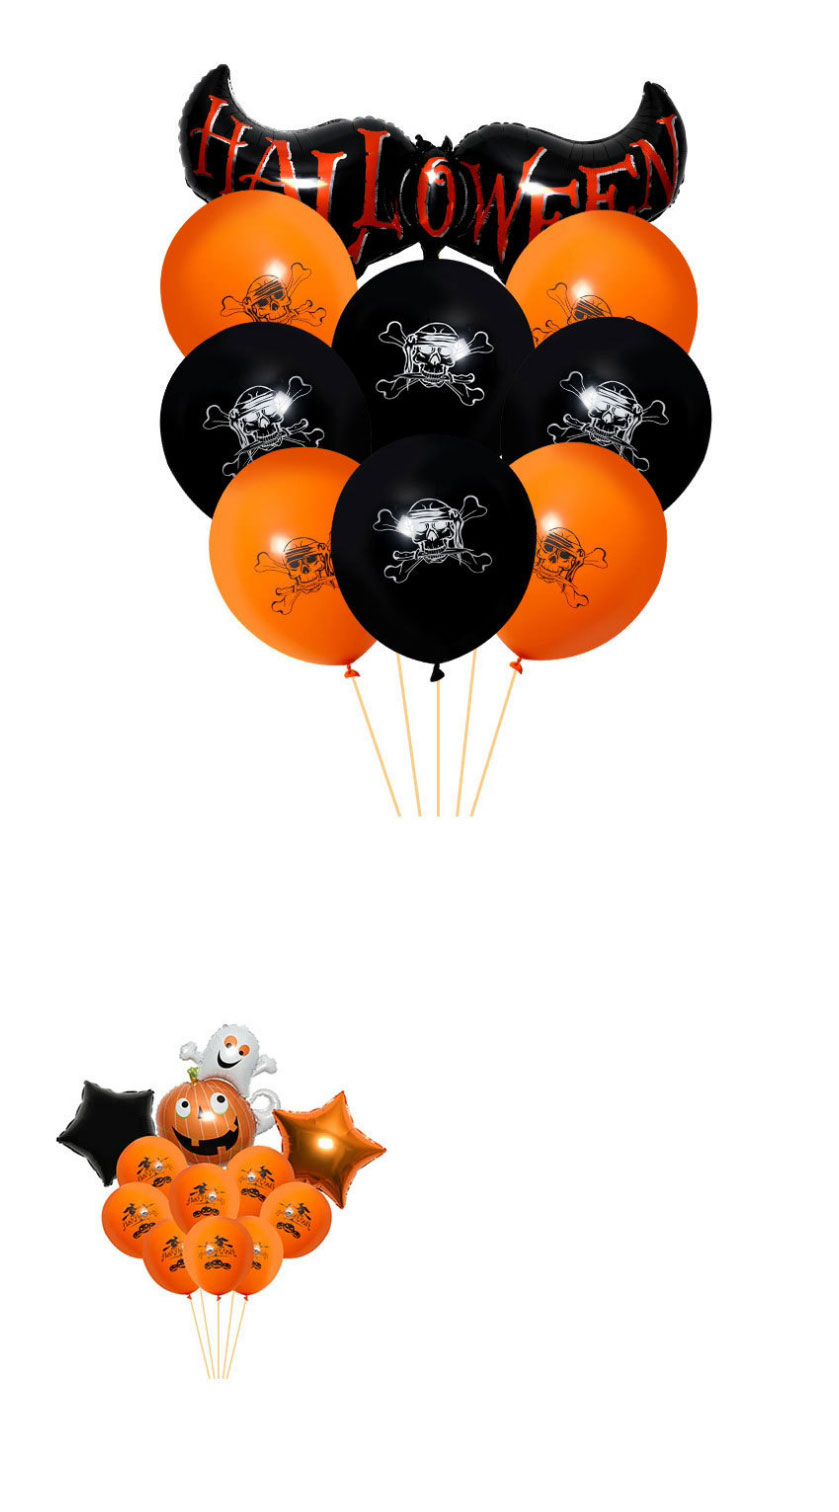 Fashion Balloon Combination 3 Halloween Printing Thickened Balloon Set,Festival & Party Supplies